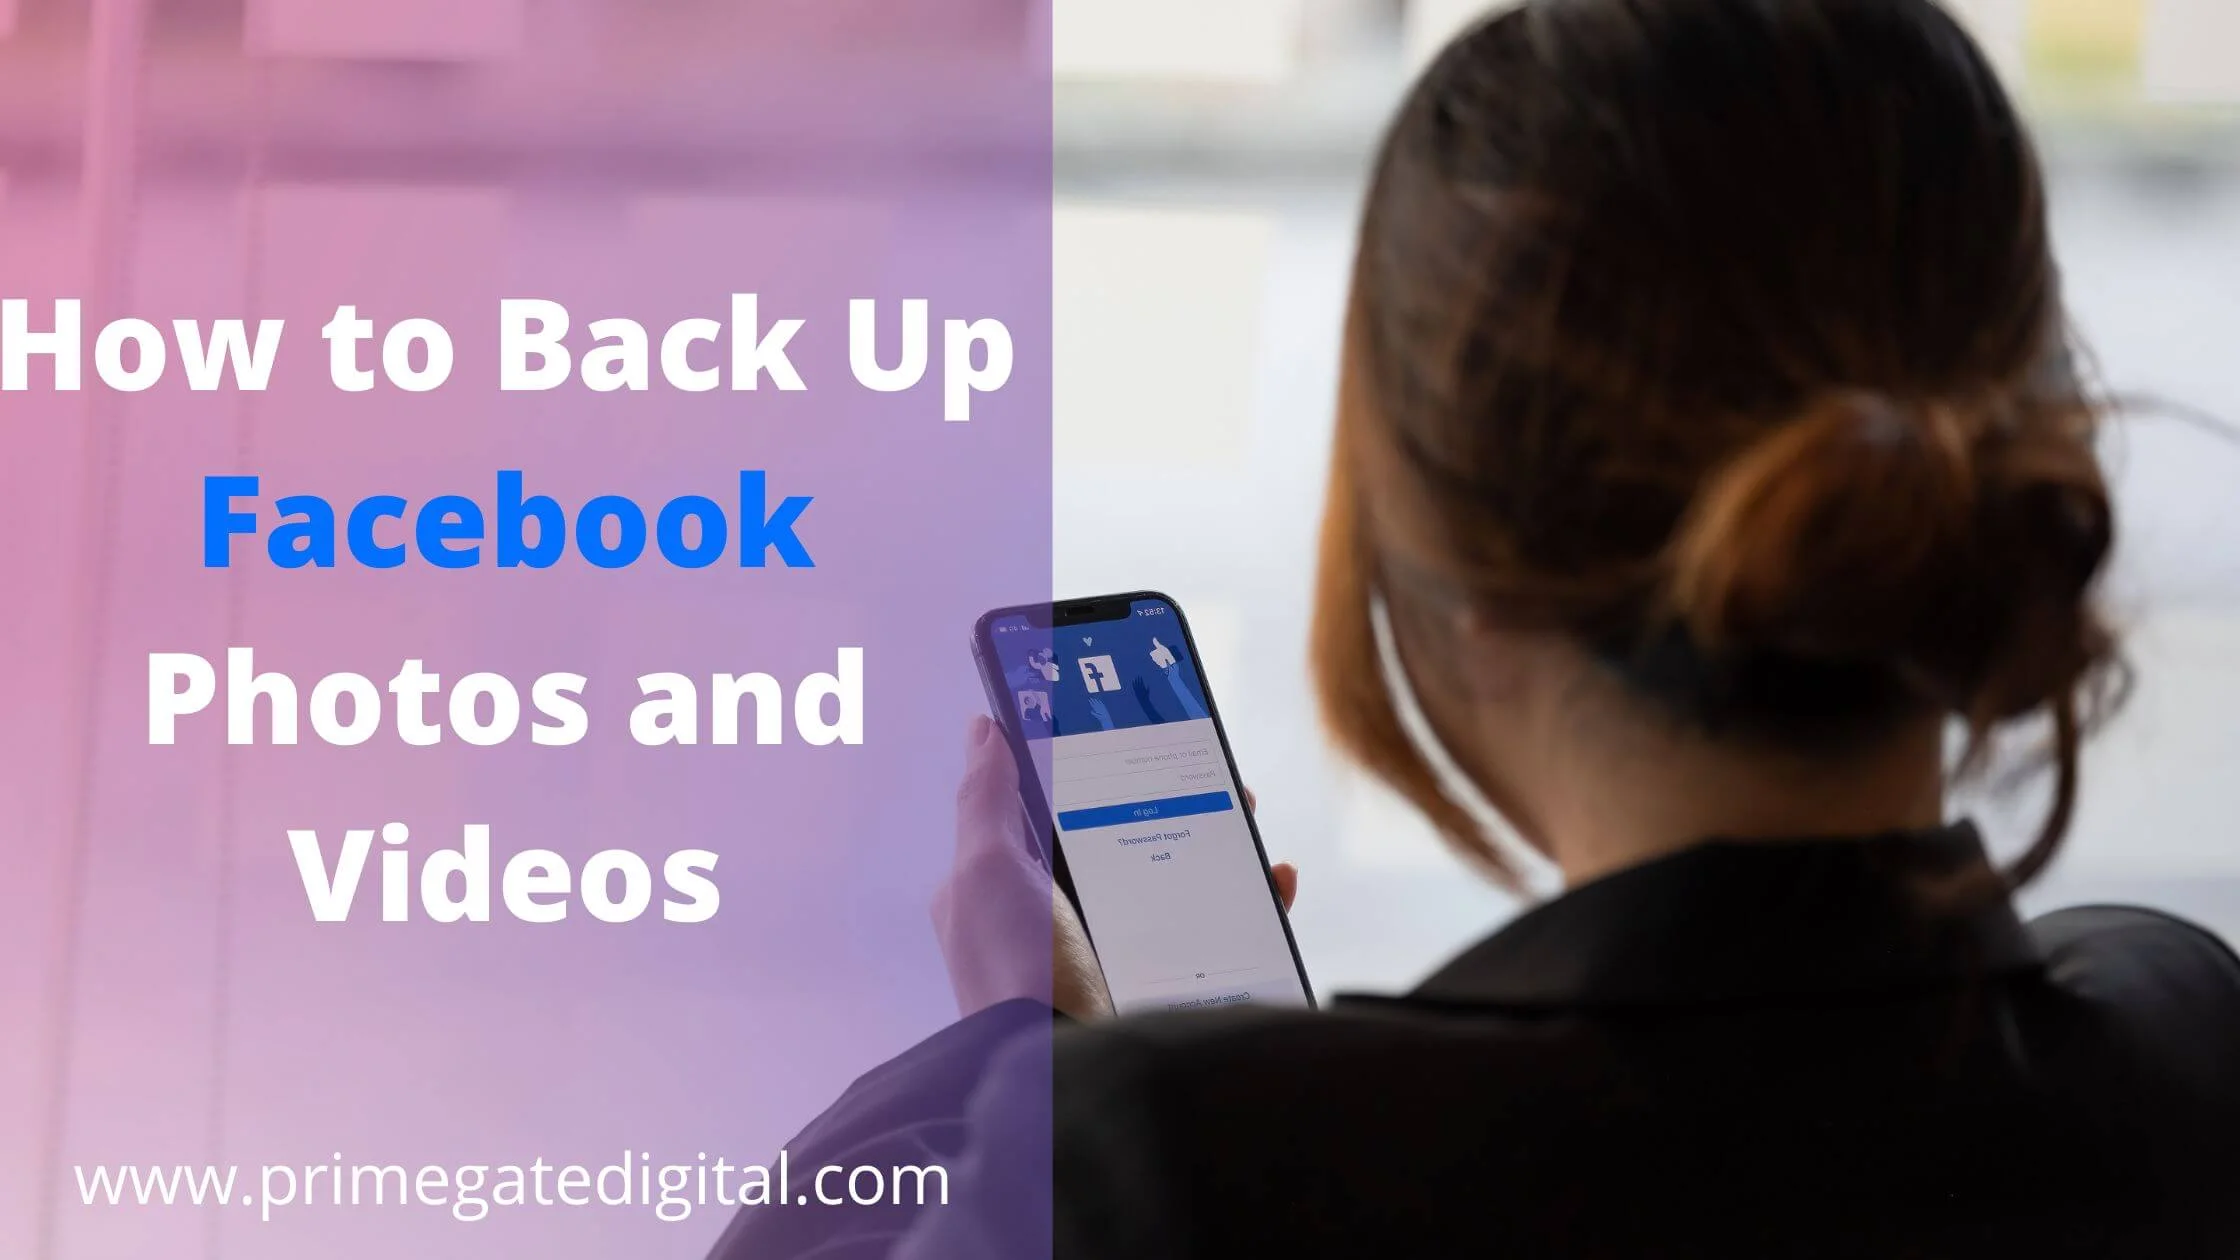 Back Up Facebook Photos and Videos